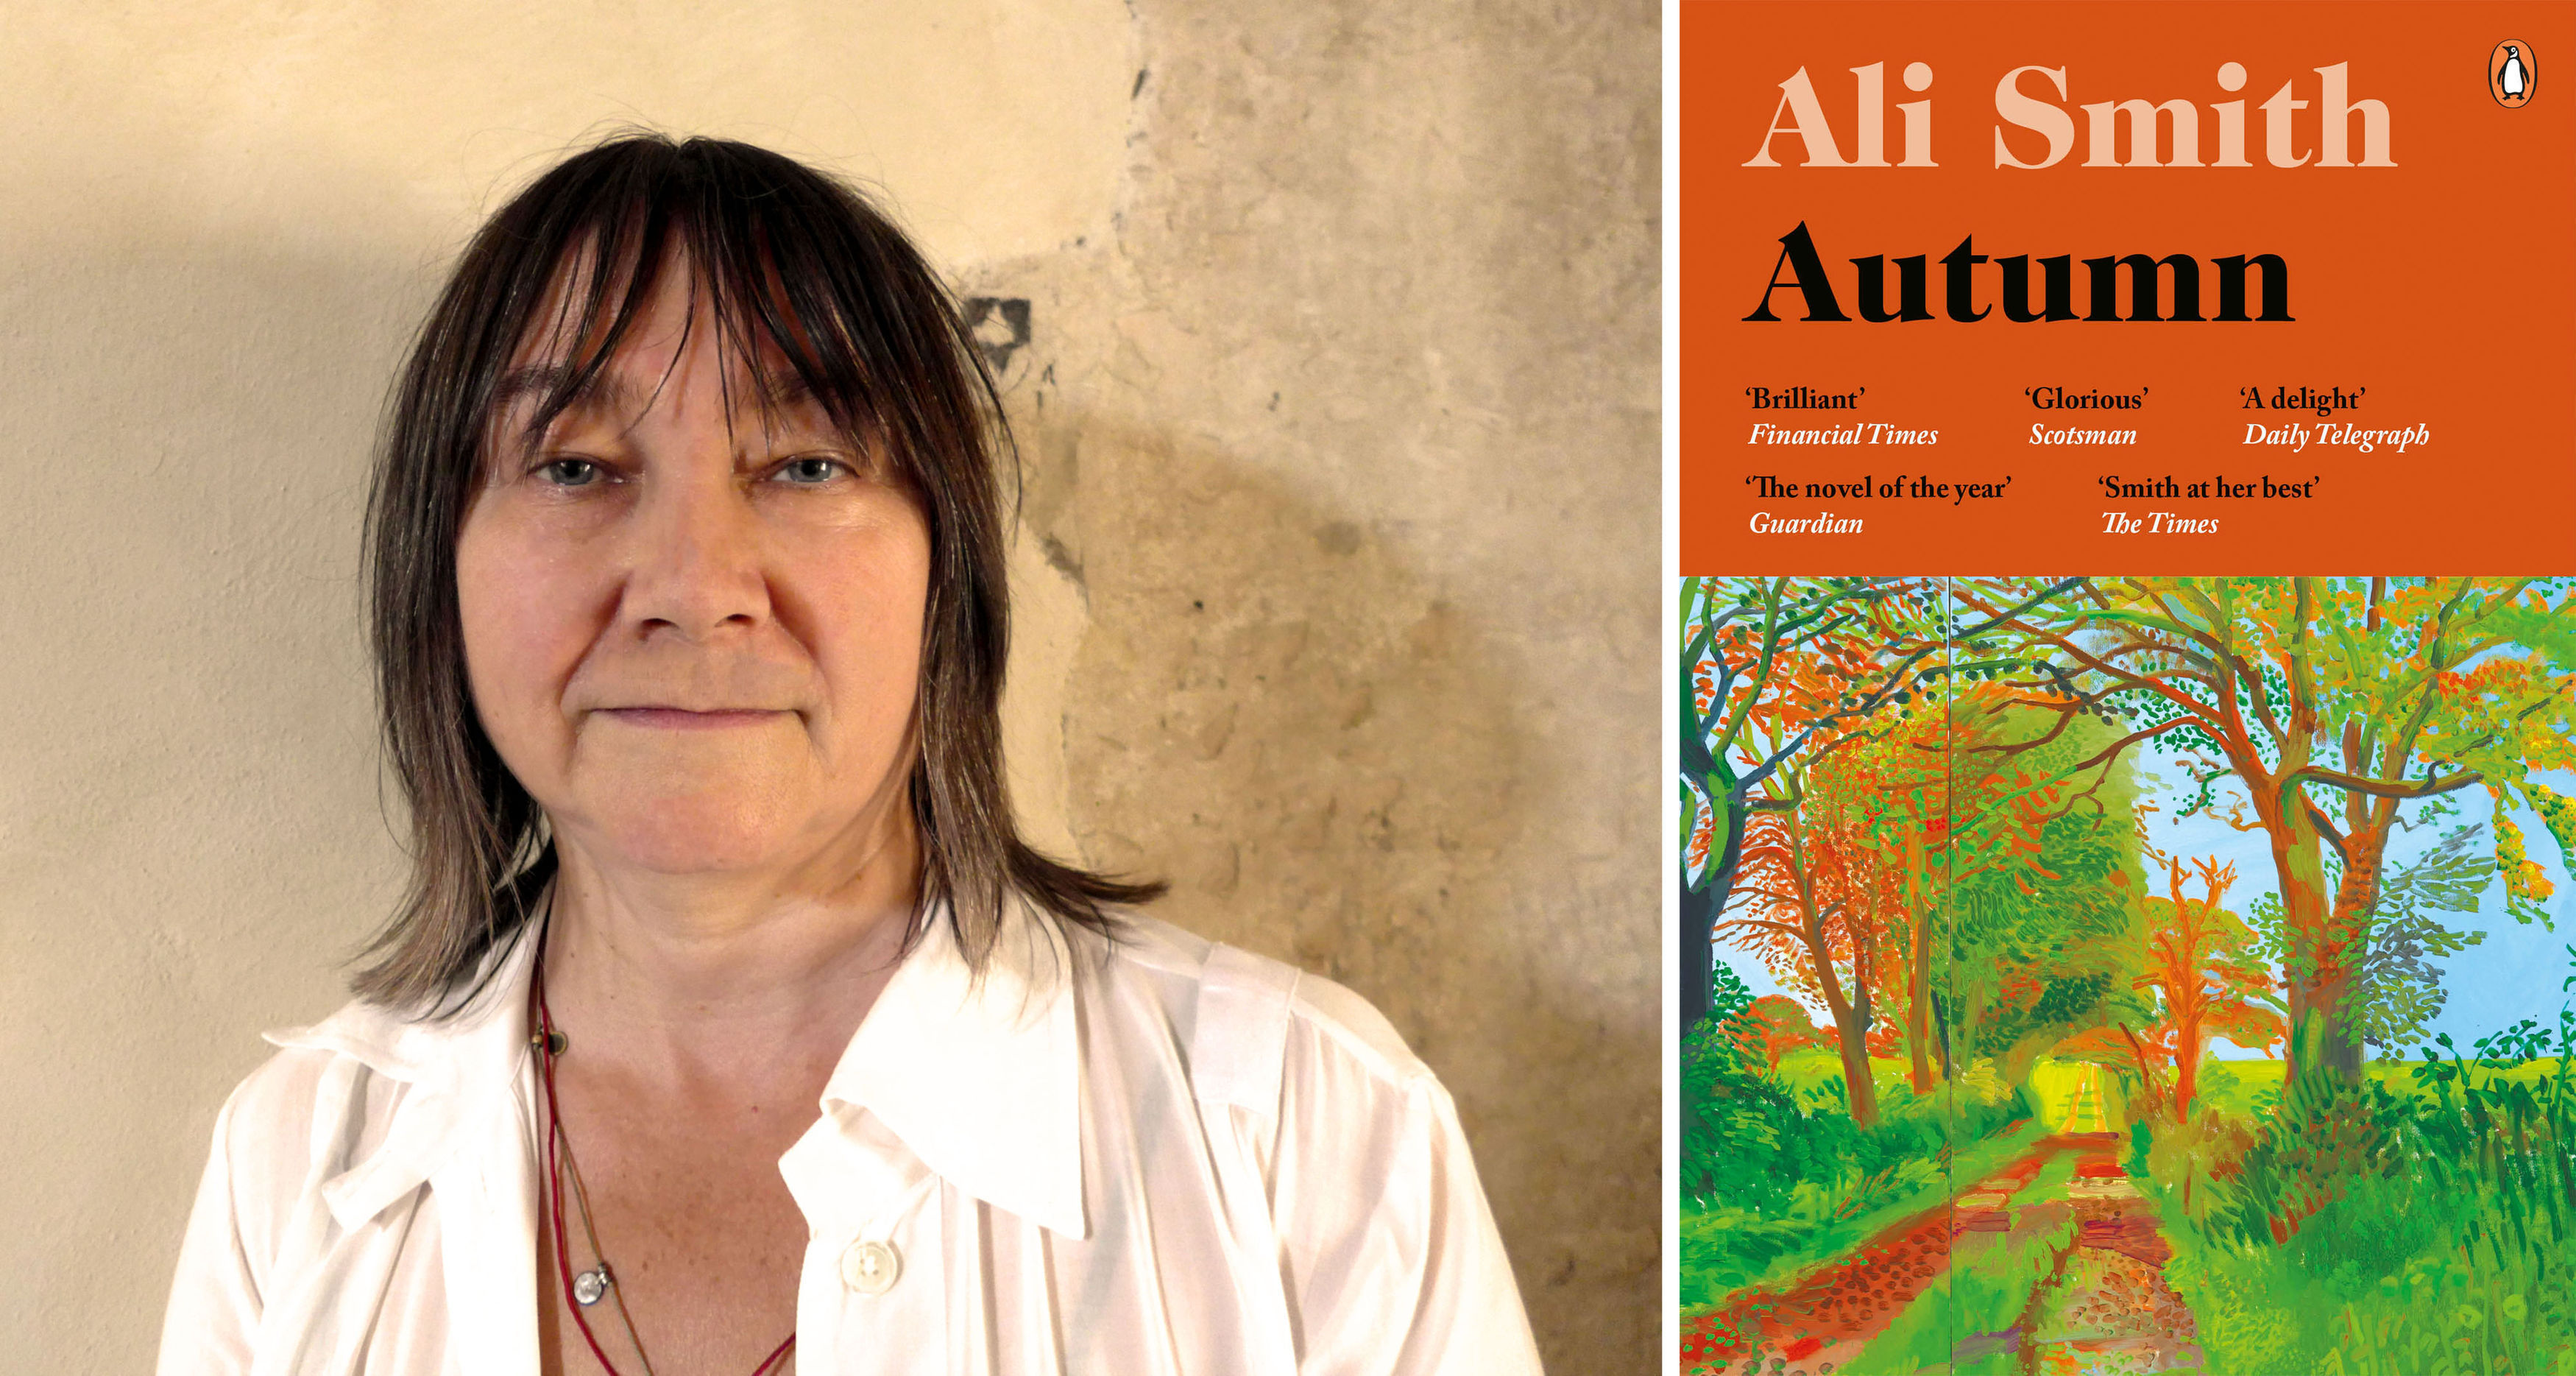 Ali Smith with the cover of her book Autumn (Man Booker/PA)